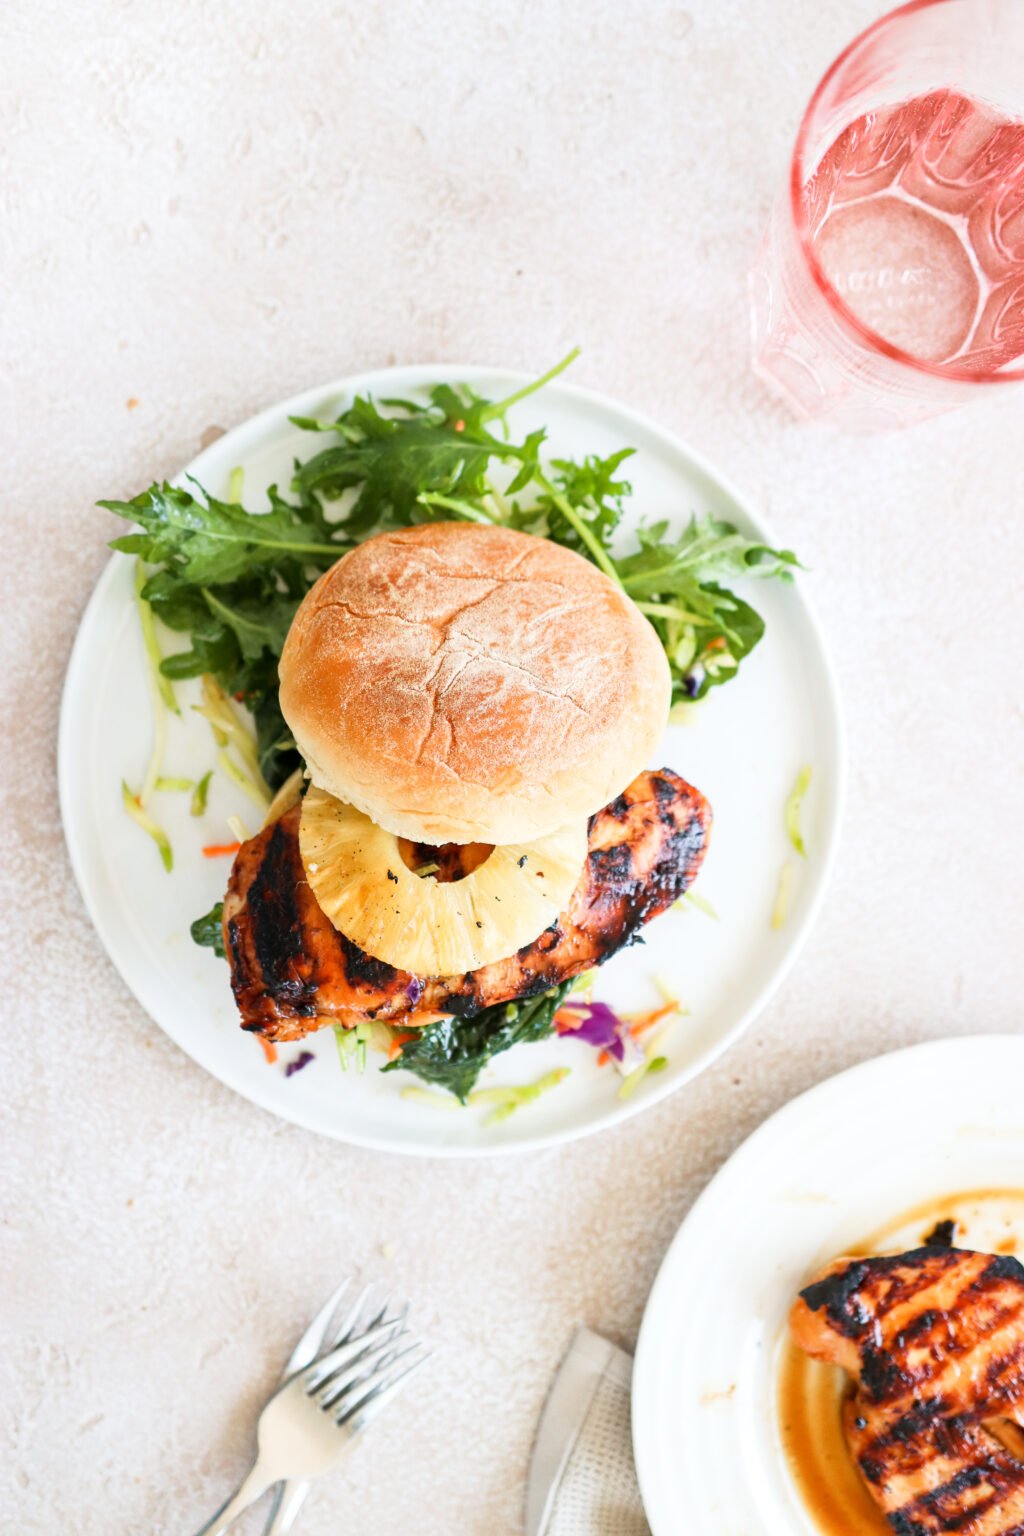 A grilled chicken burger topped with a pineapple ring is on a white plate and is surrounded by an arugula salad. 